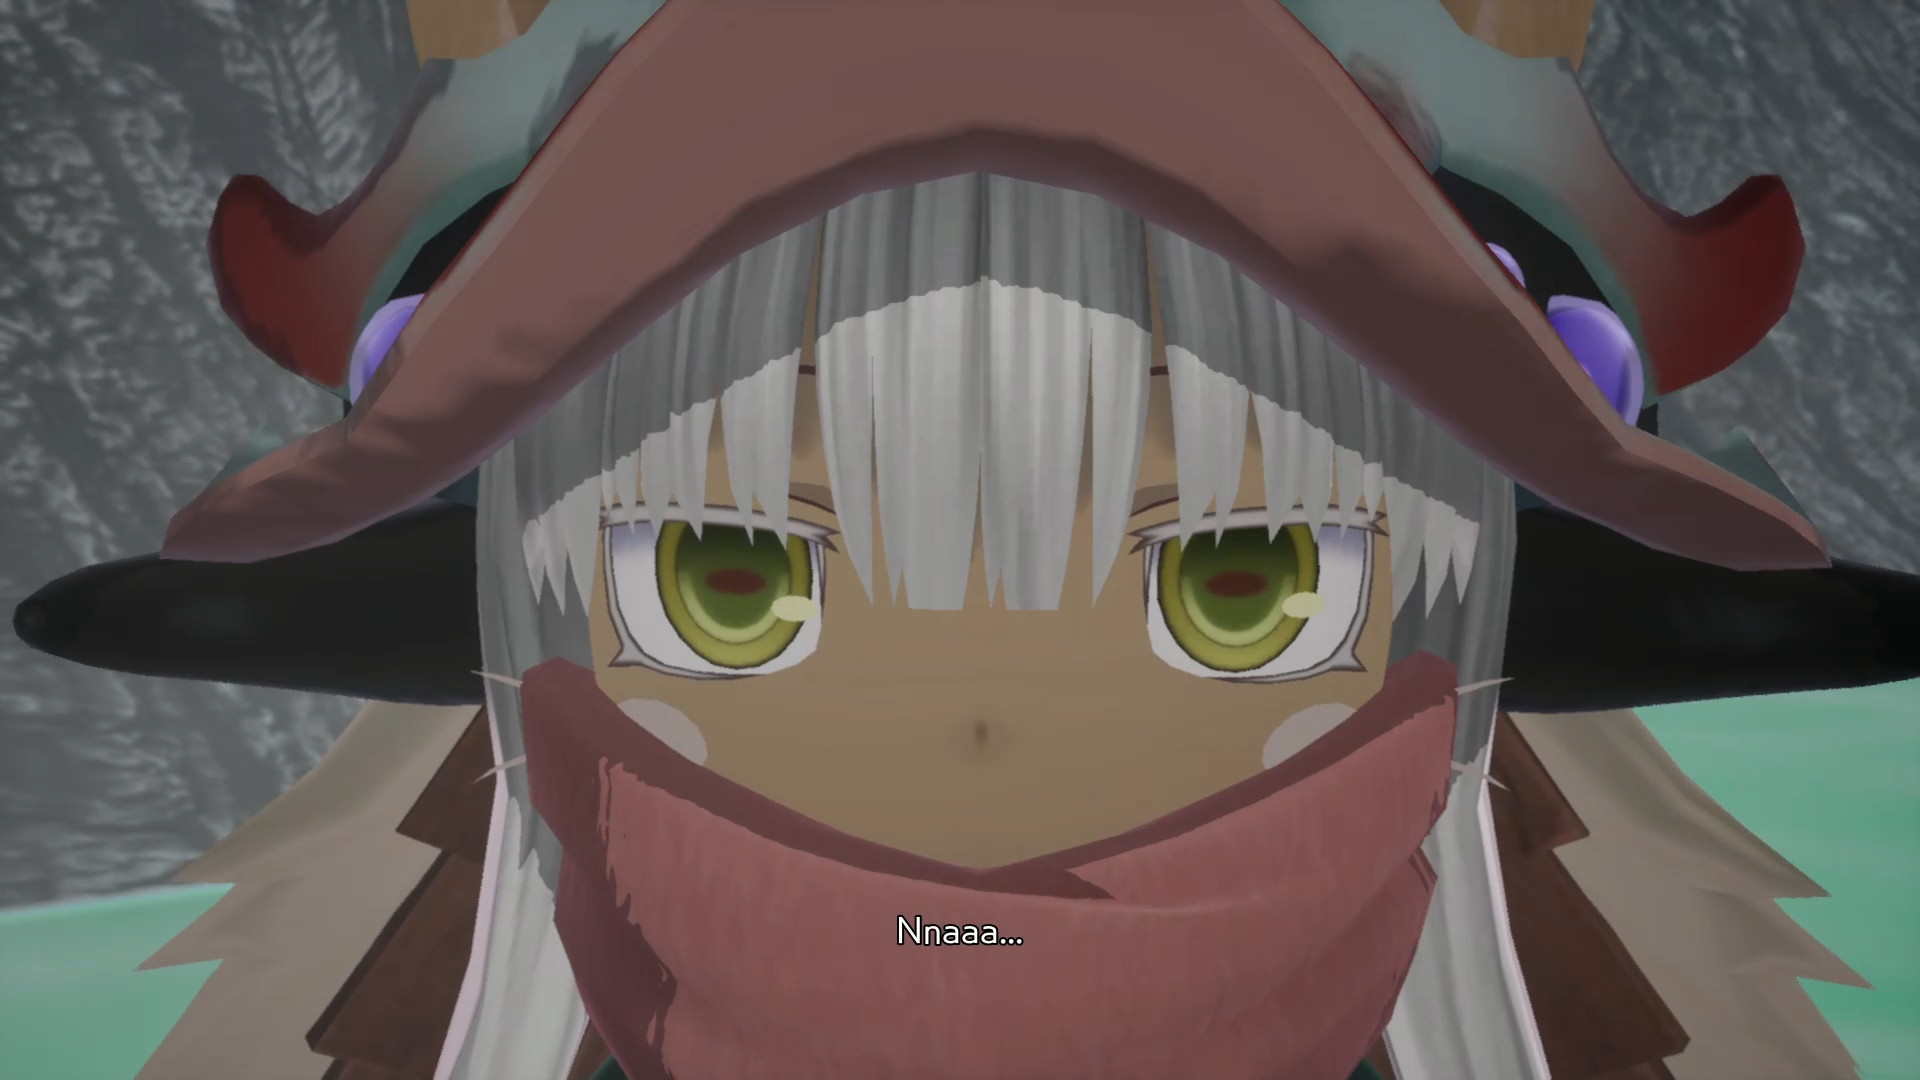 Made In Abyss: Binary Star Falling Into Darkness File Size